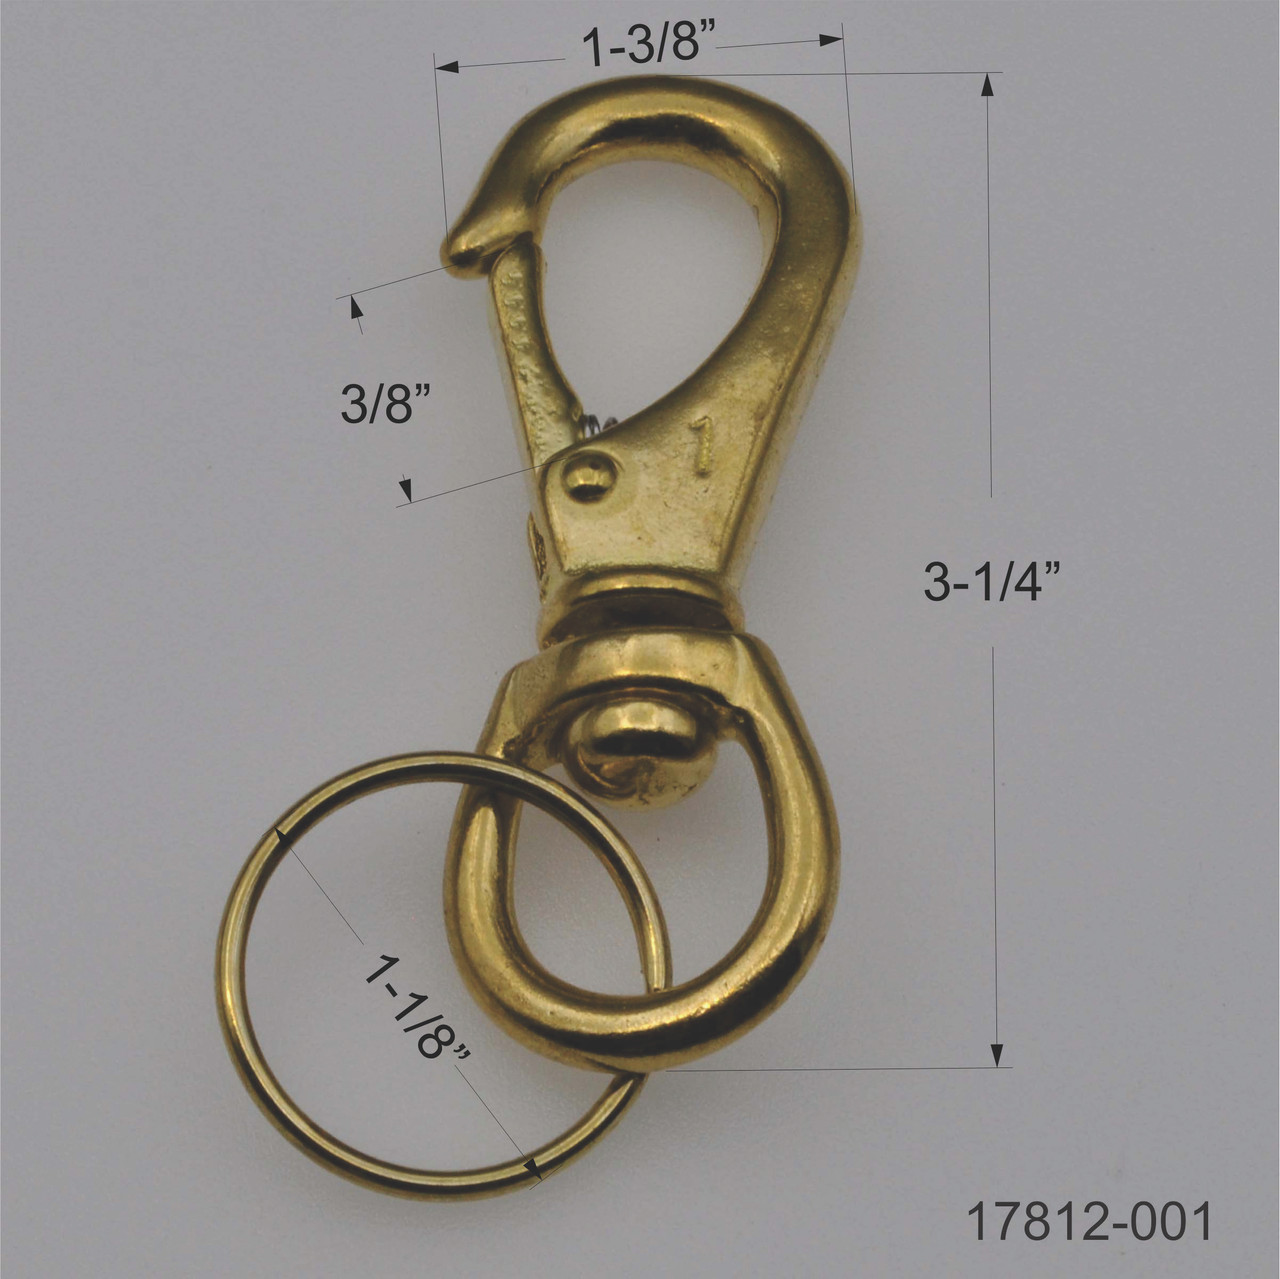 https://cdn11.bigcommerce.com/s-k4as3uan8i/images/stencil/1280x1280/products/204/4990/17812-Heavy-Duty-Boat-Snap-Clip-Key-Ring-Solid-Brass-details__44413.1619709998.jpg?c=1